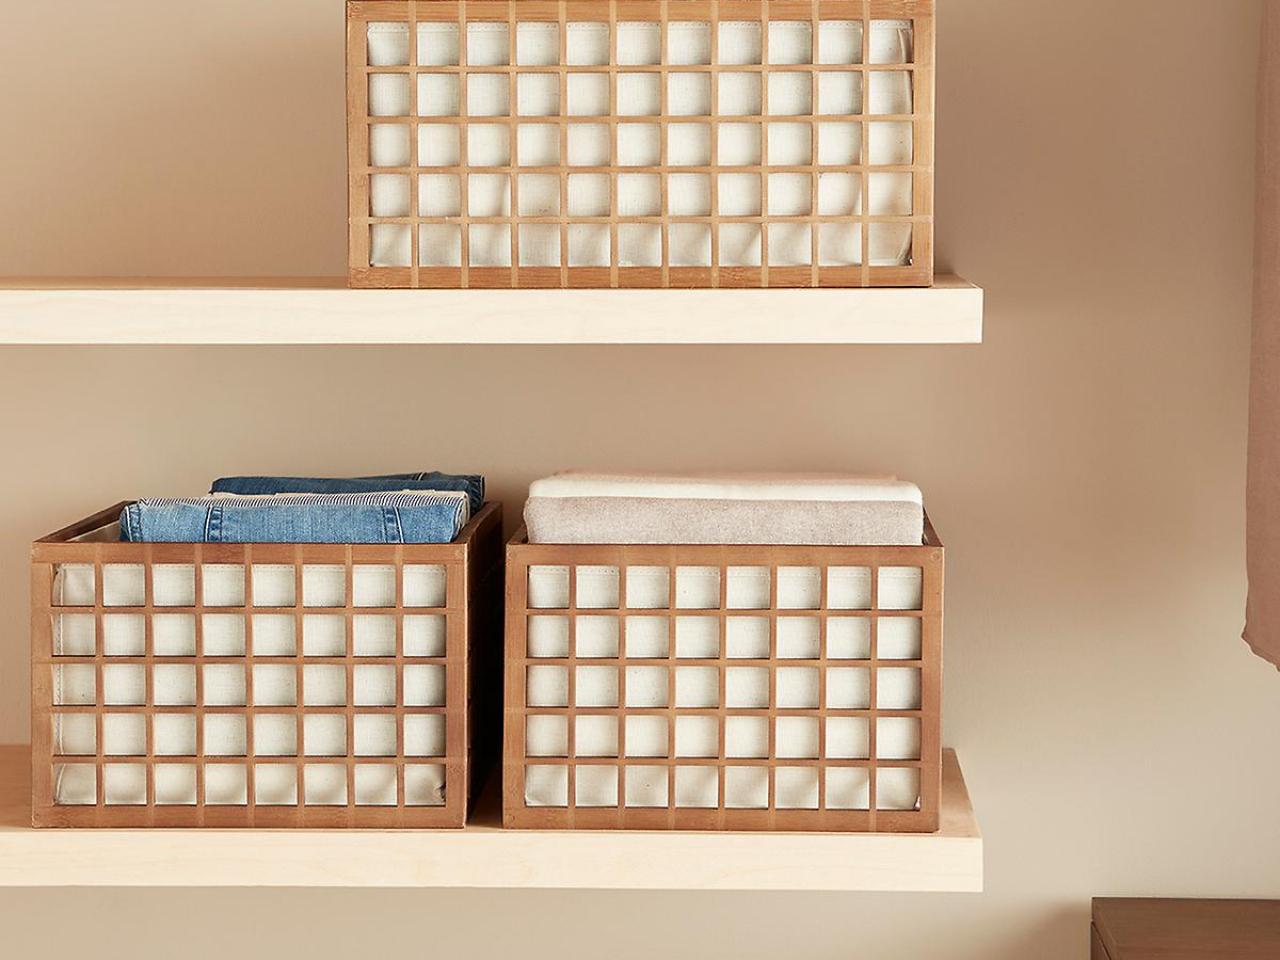 These 19 Kitchen Organizers and Containers Are Editor-Approved